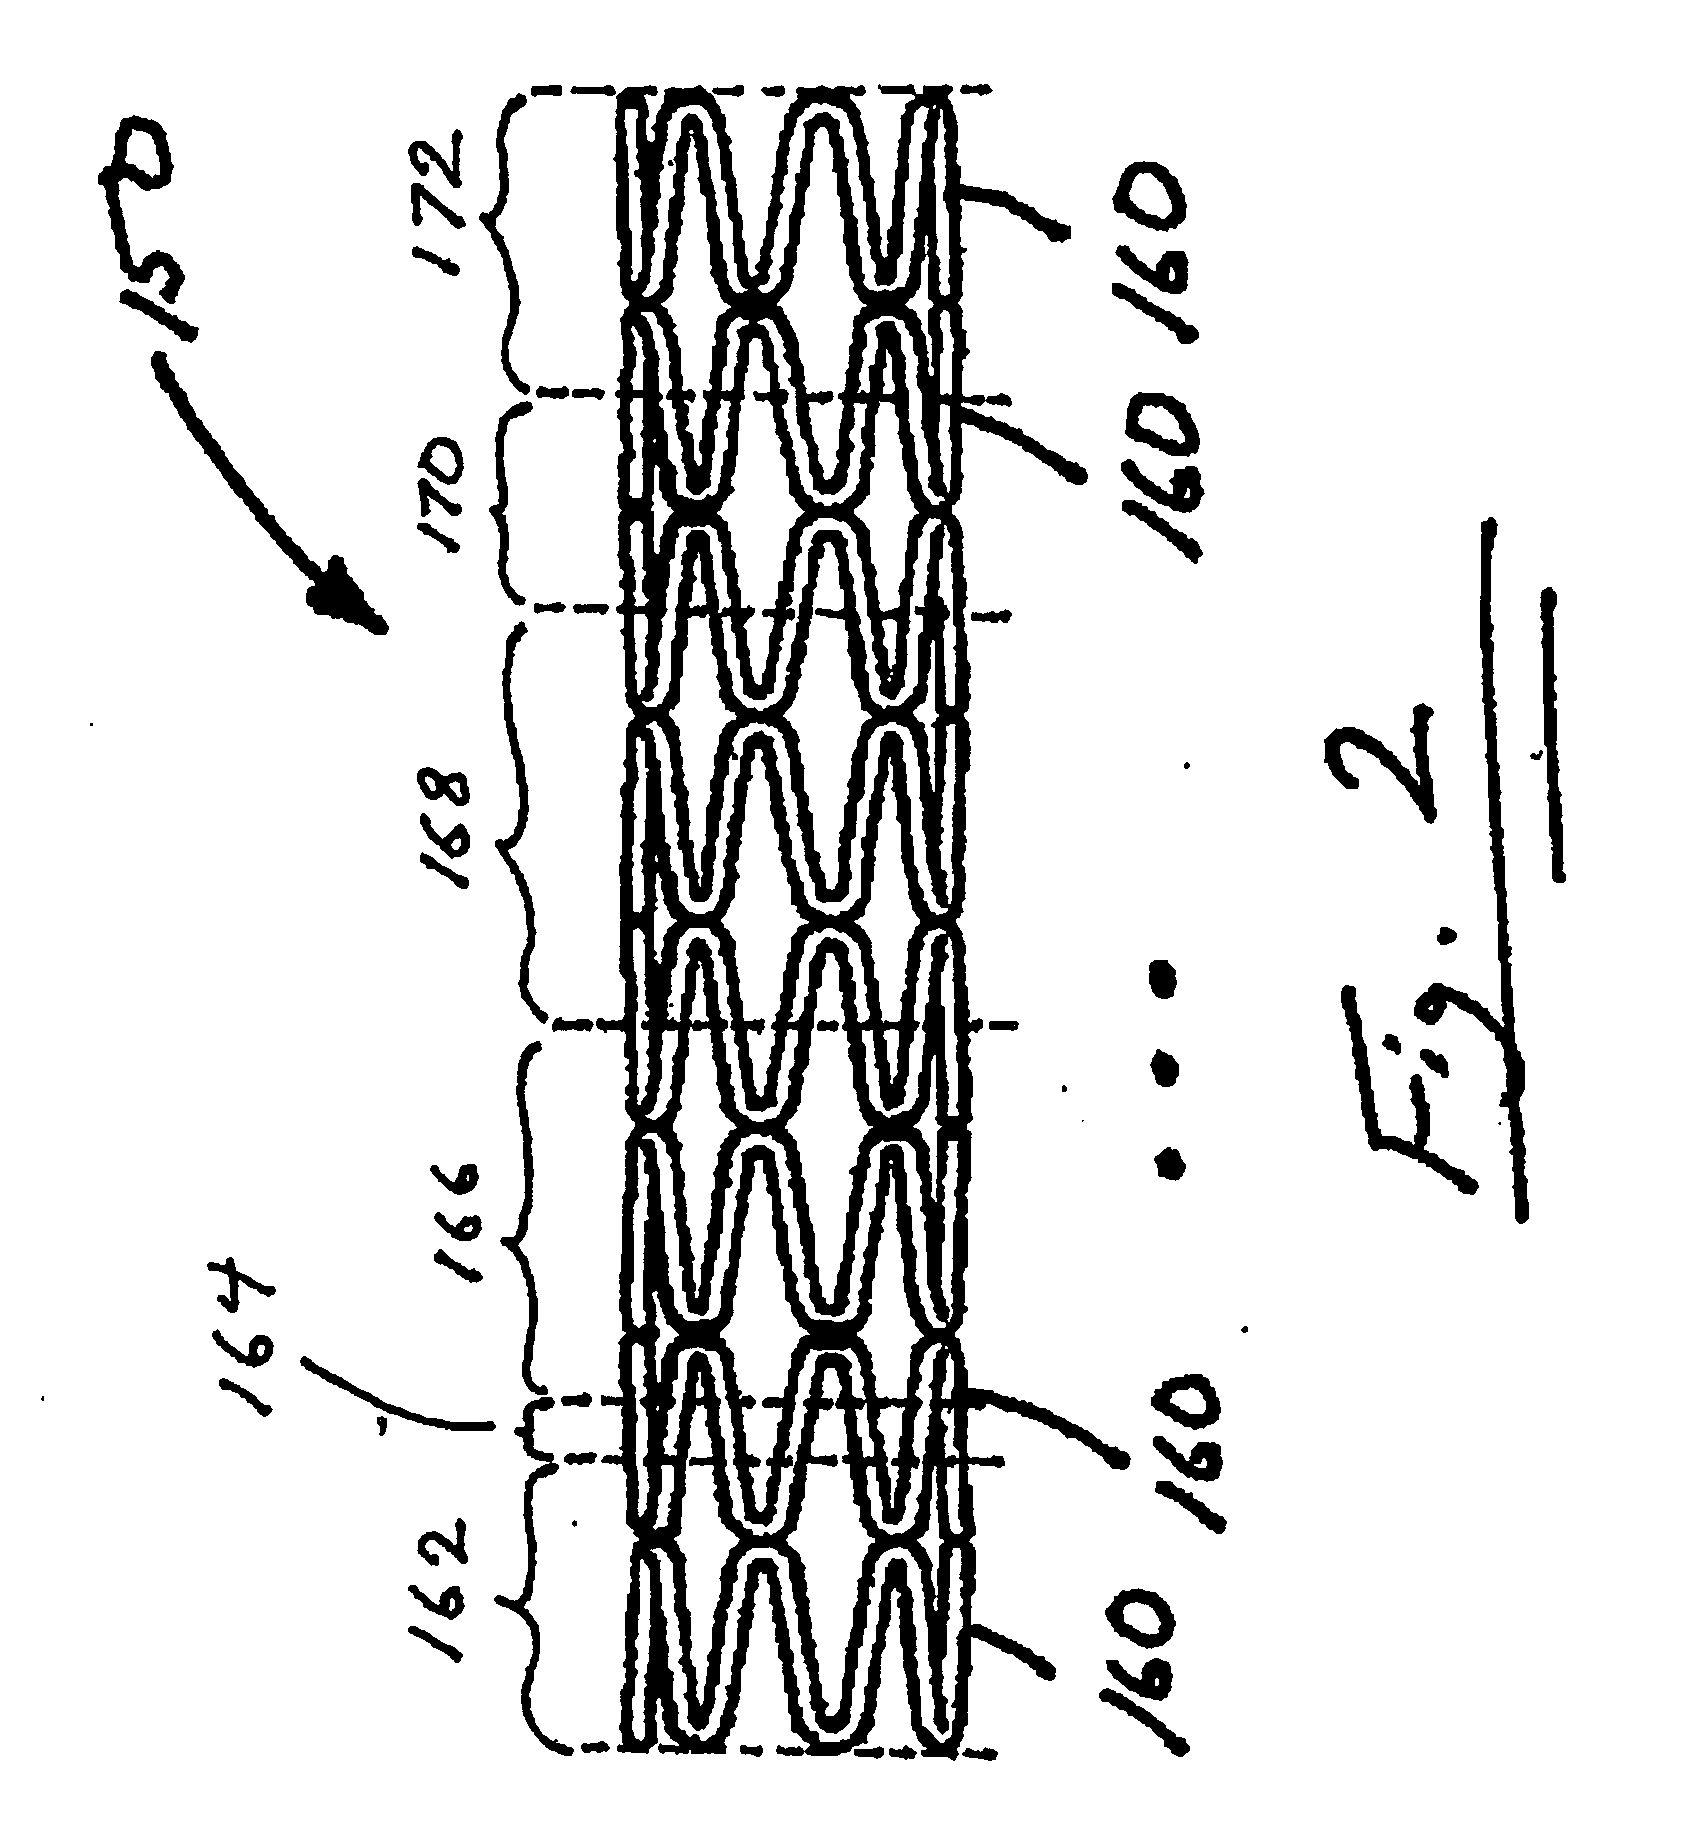 Stent with intermittent coating